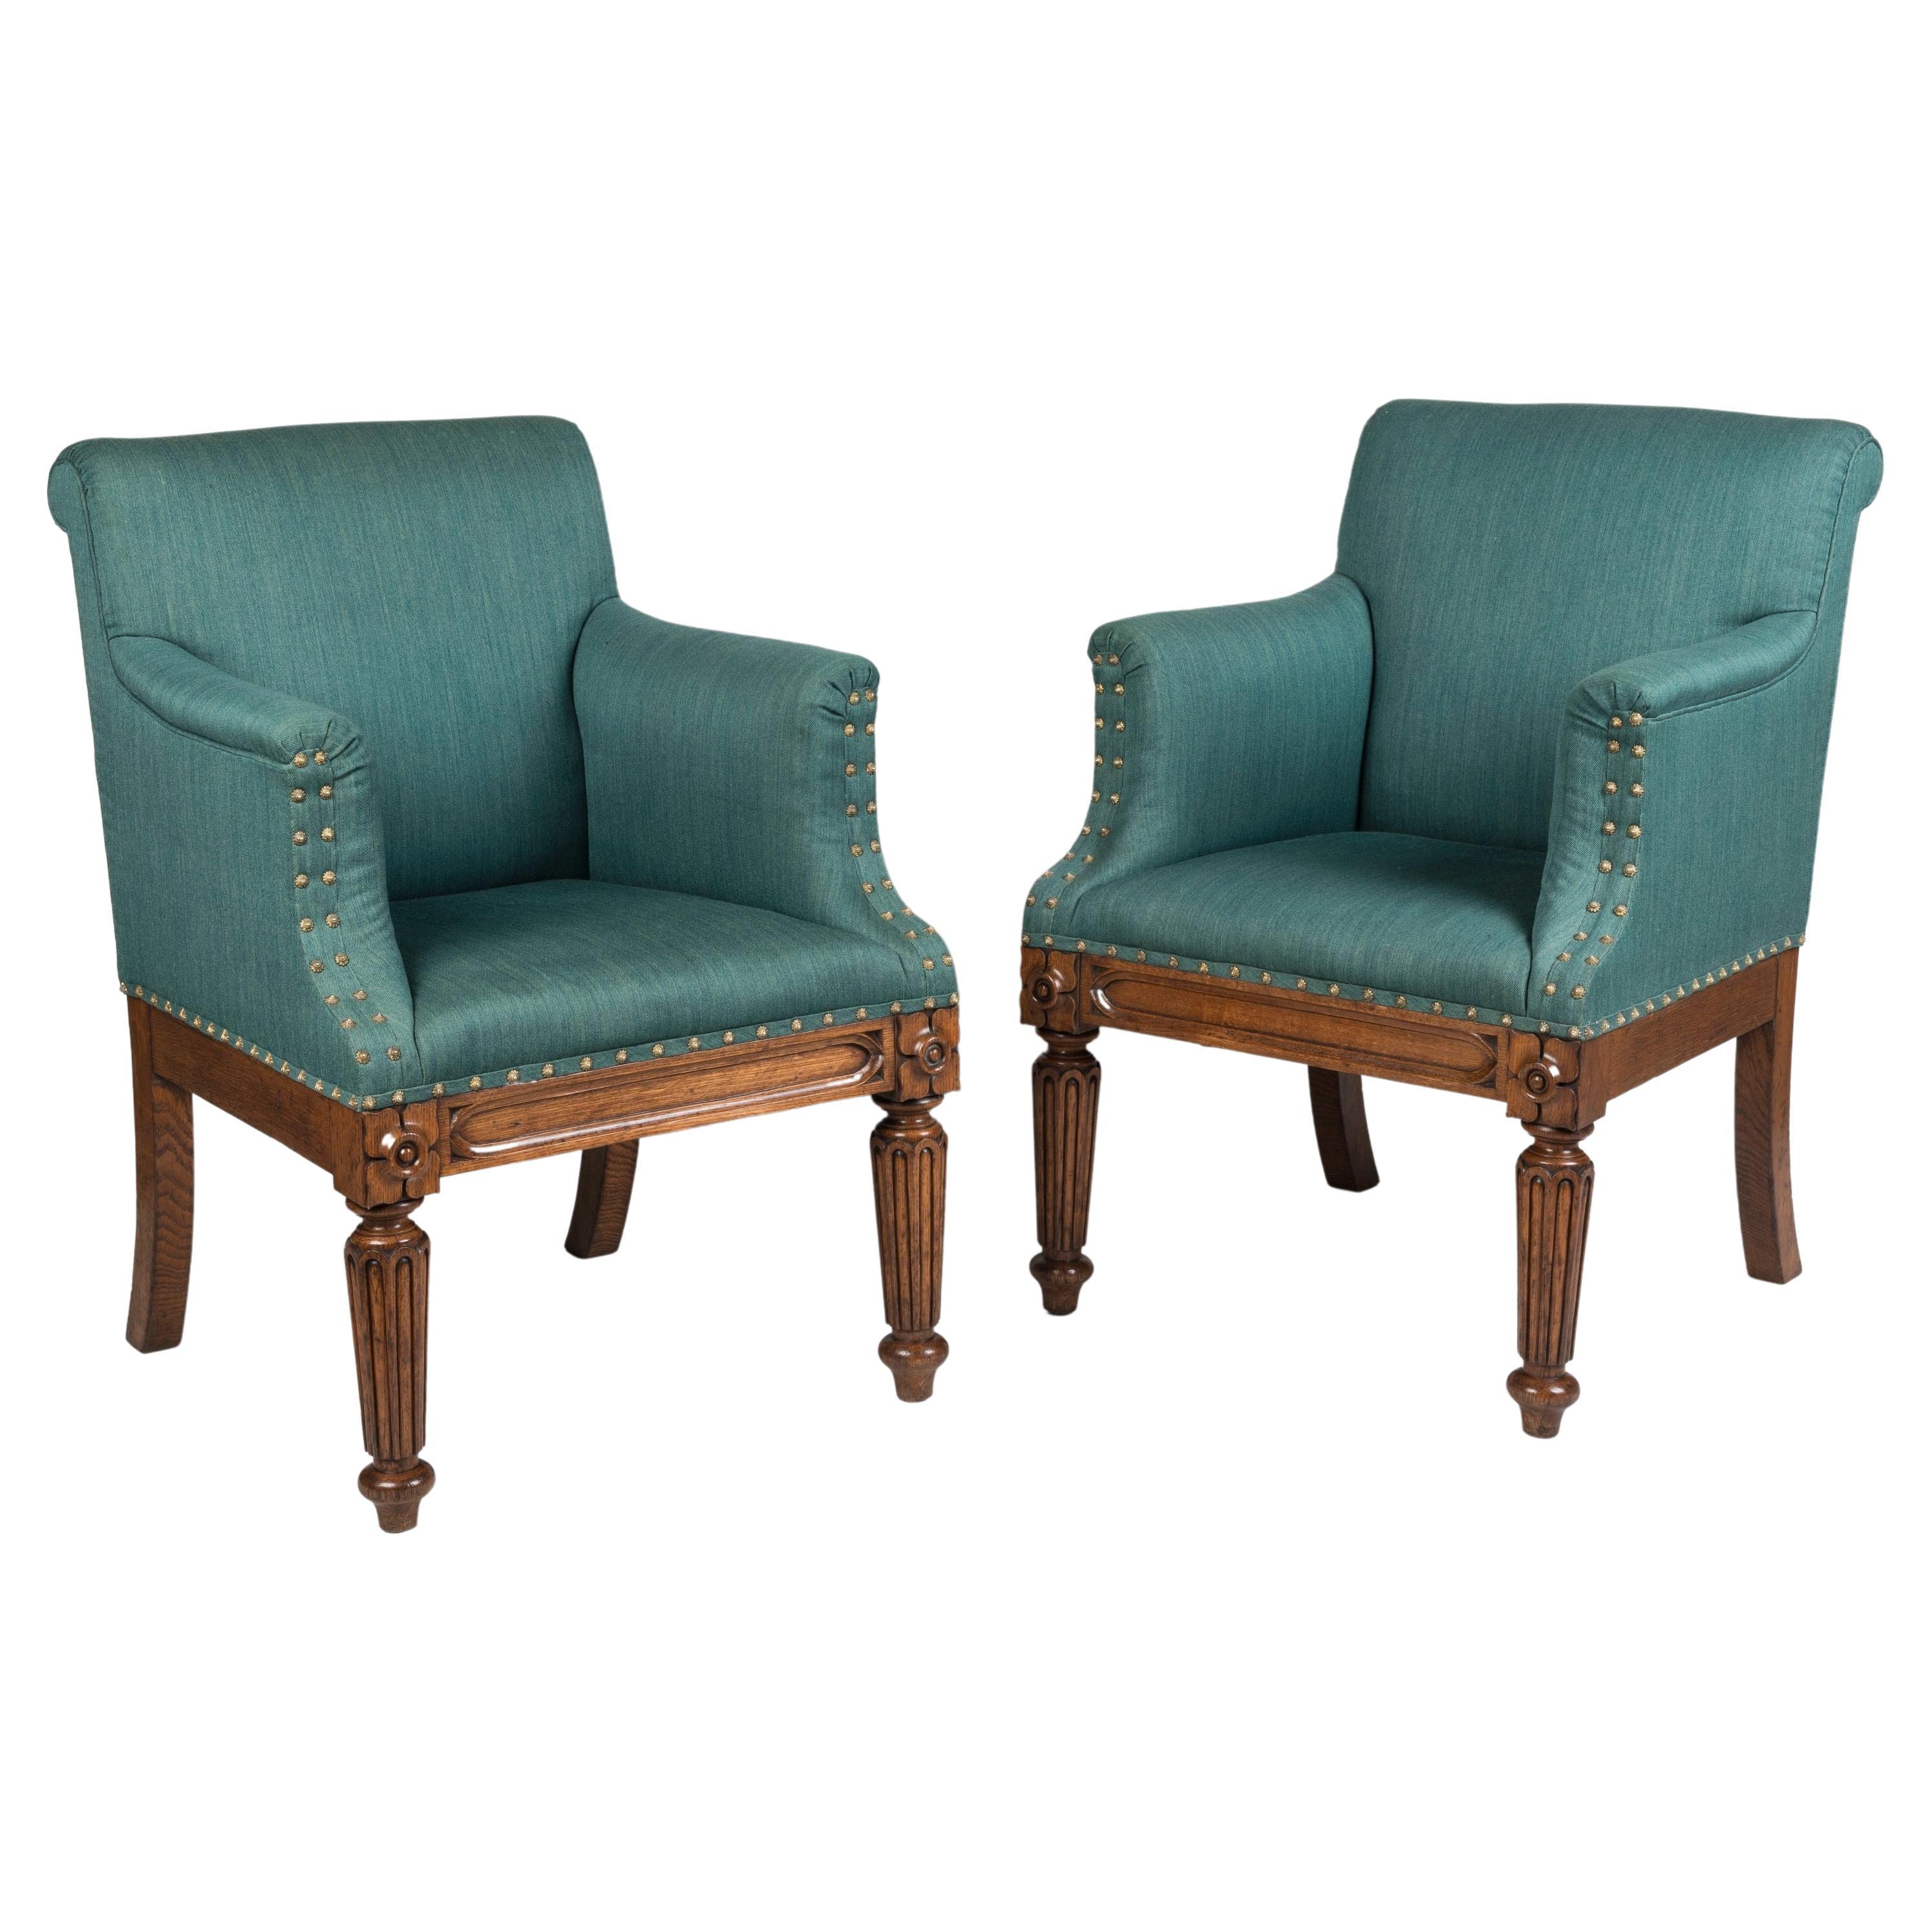 19th Century George IV Period Carved Oak Armchairs with Blue Upholstery